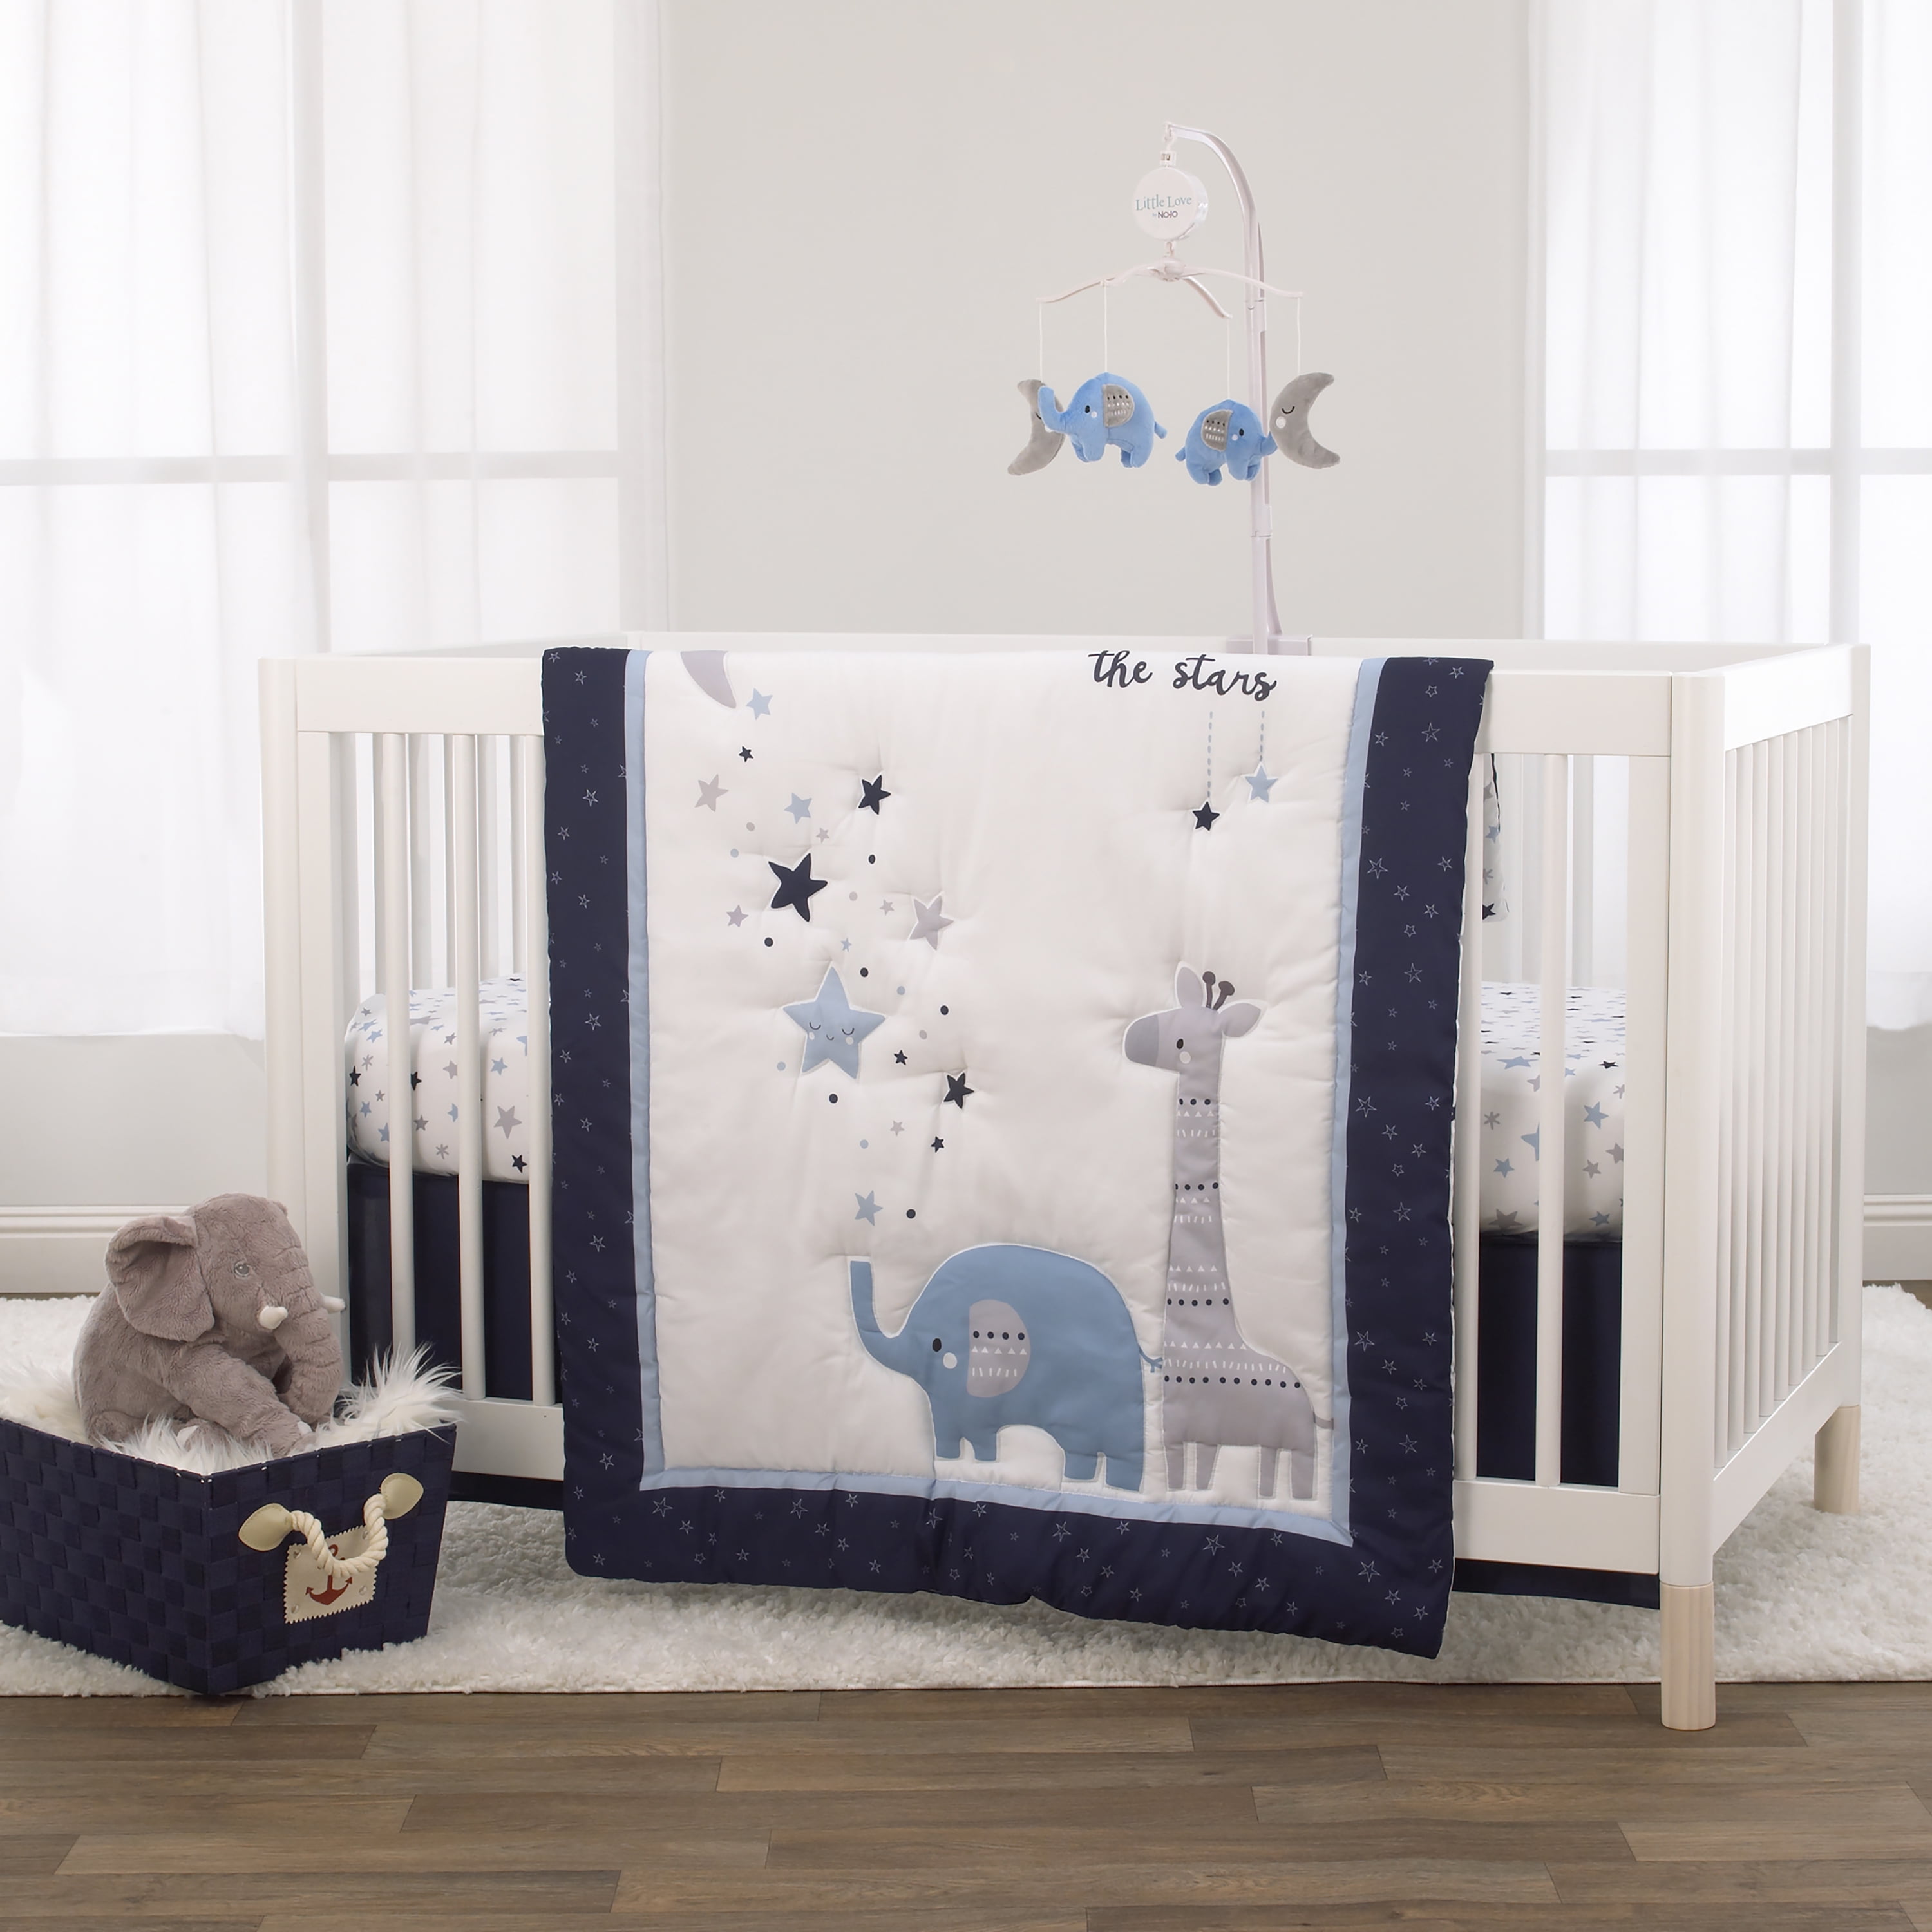 MOON AND STARS BABY GIRLS CRIB BEDDING NURSERY FOR BABY SHOWER  GIFT 6 PCS 